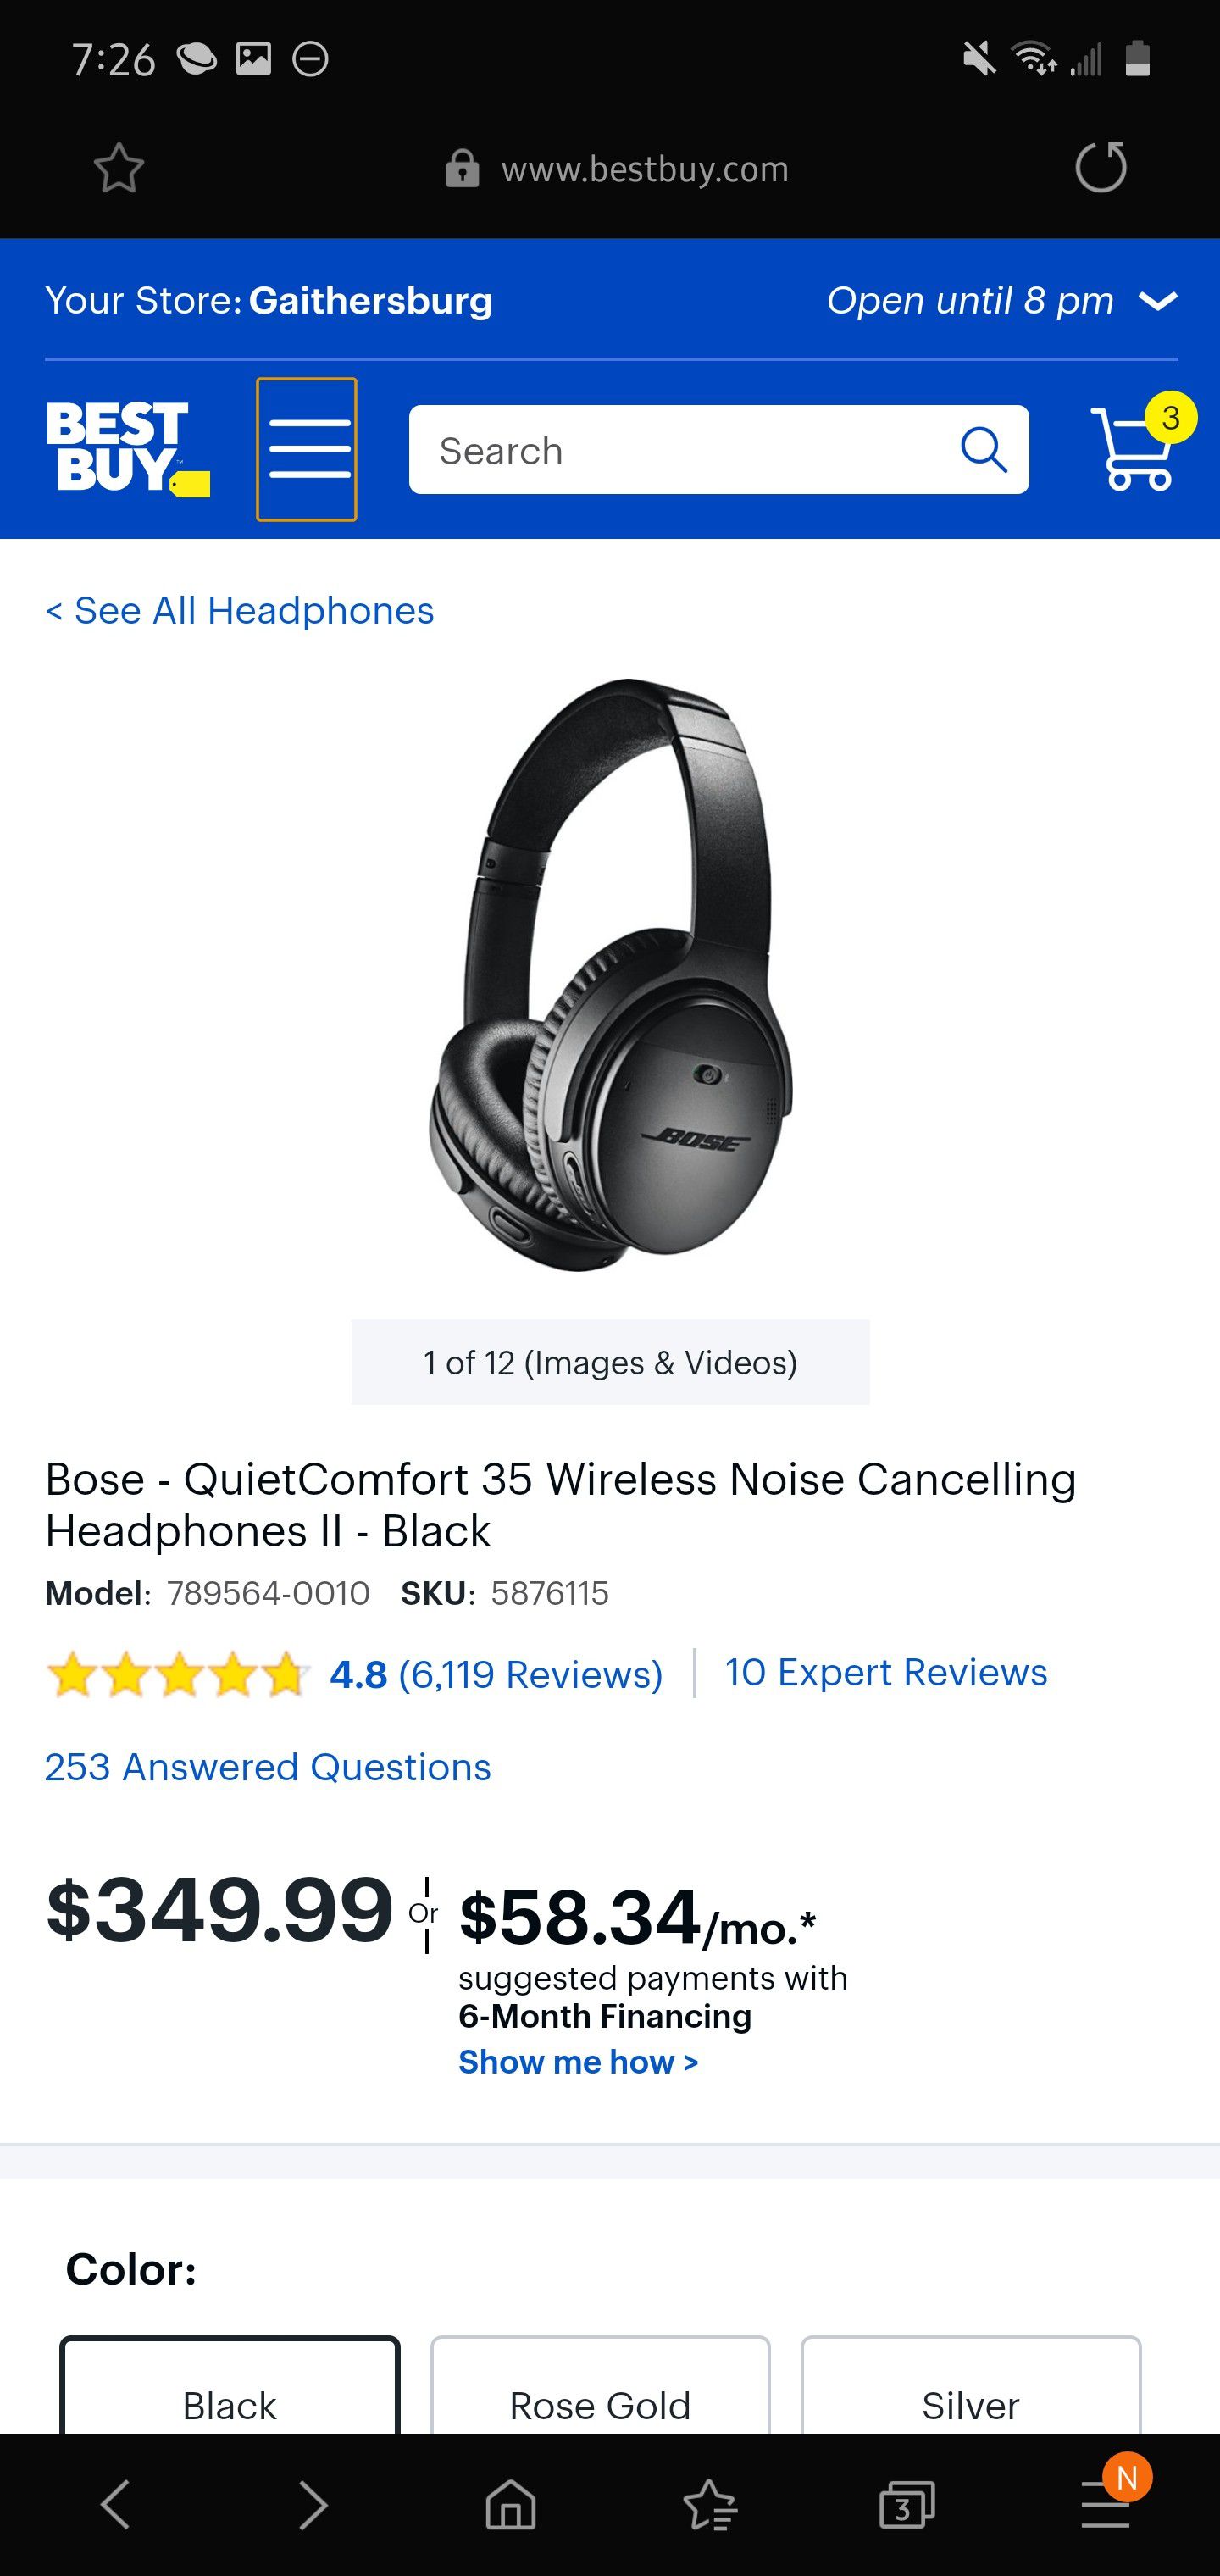 Bose - QuietComfort 35 Wireless Noise Cancelling Headphones II - Black new and sealed